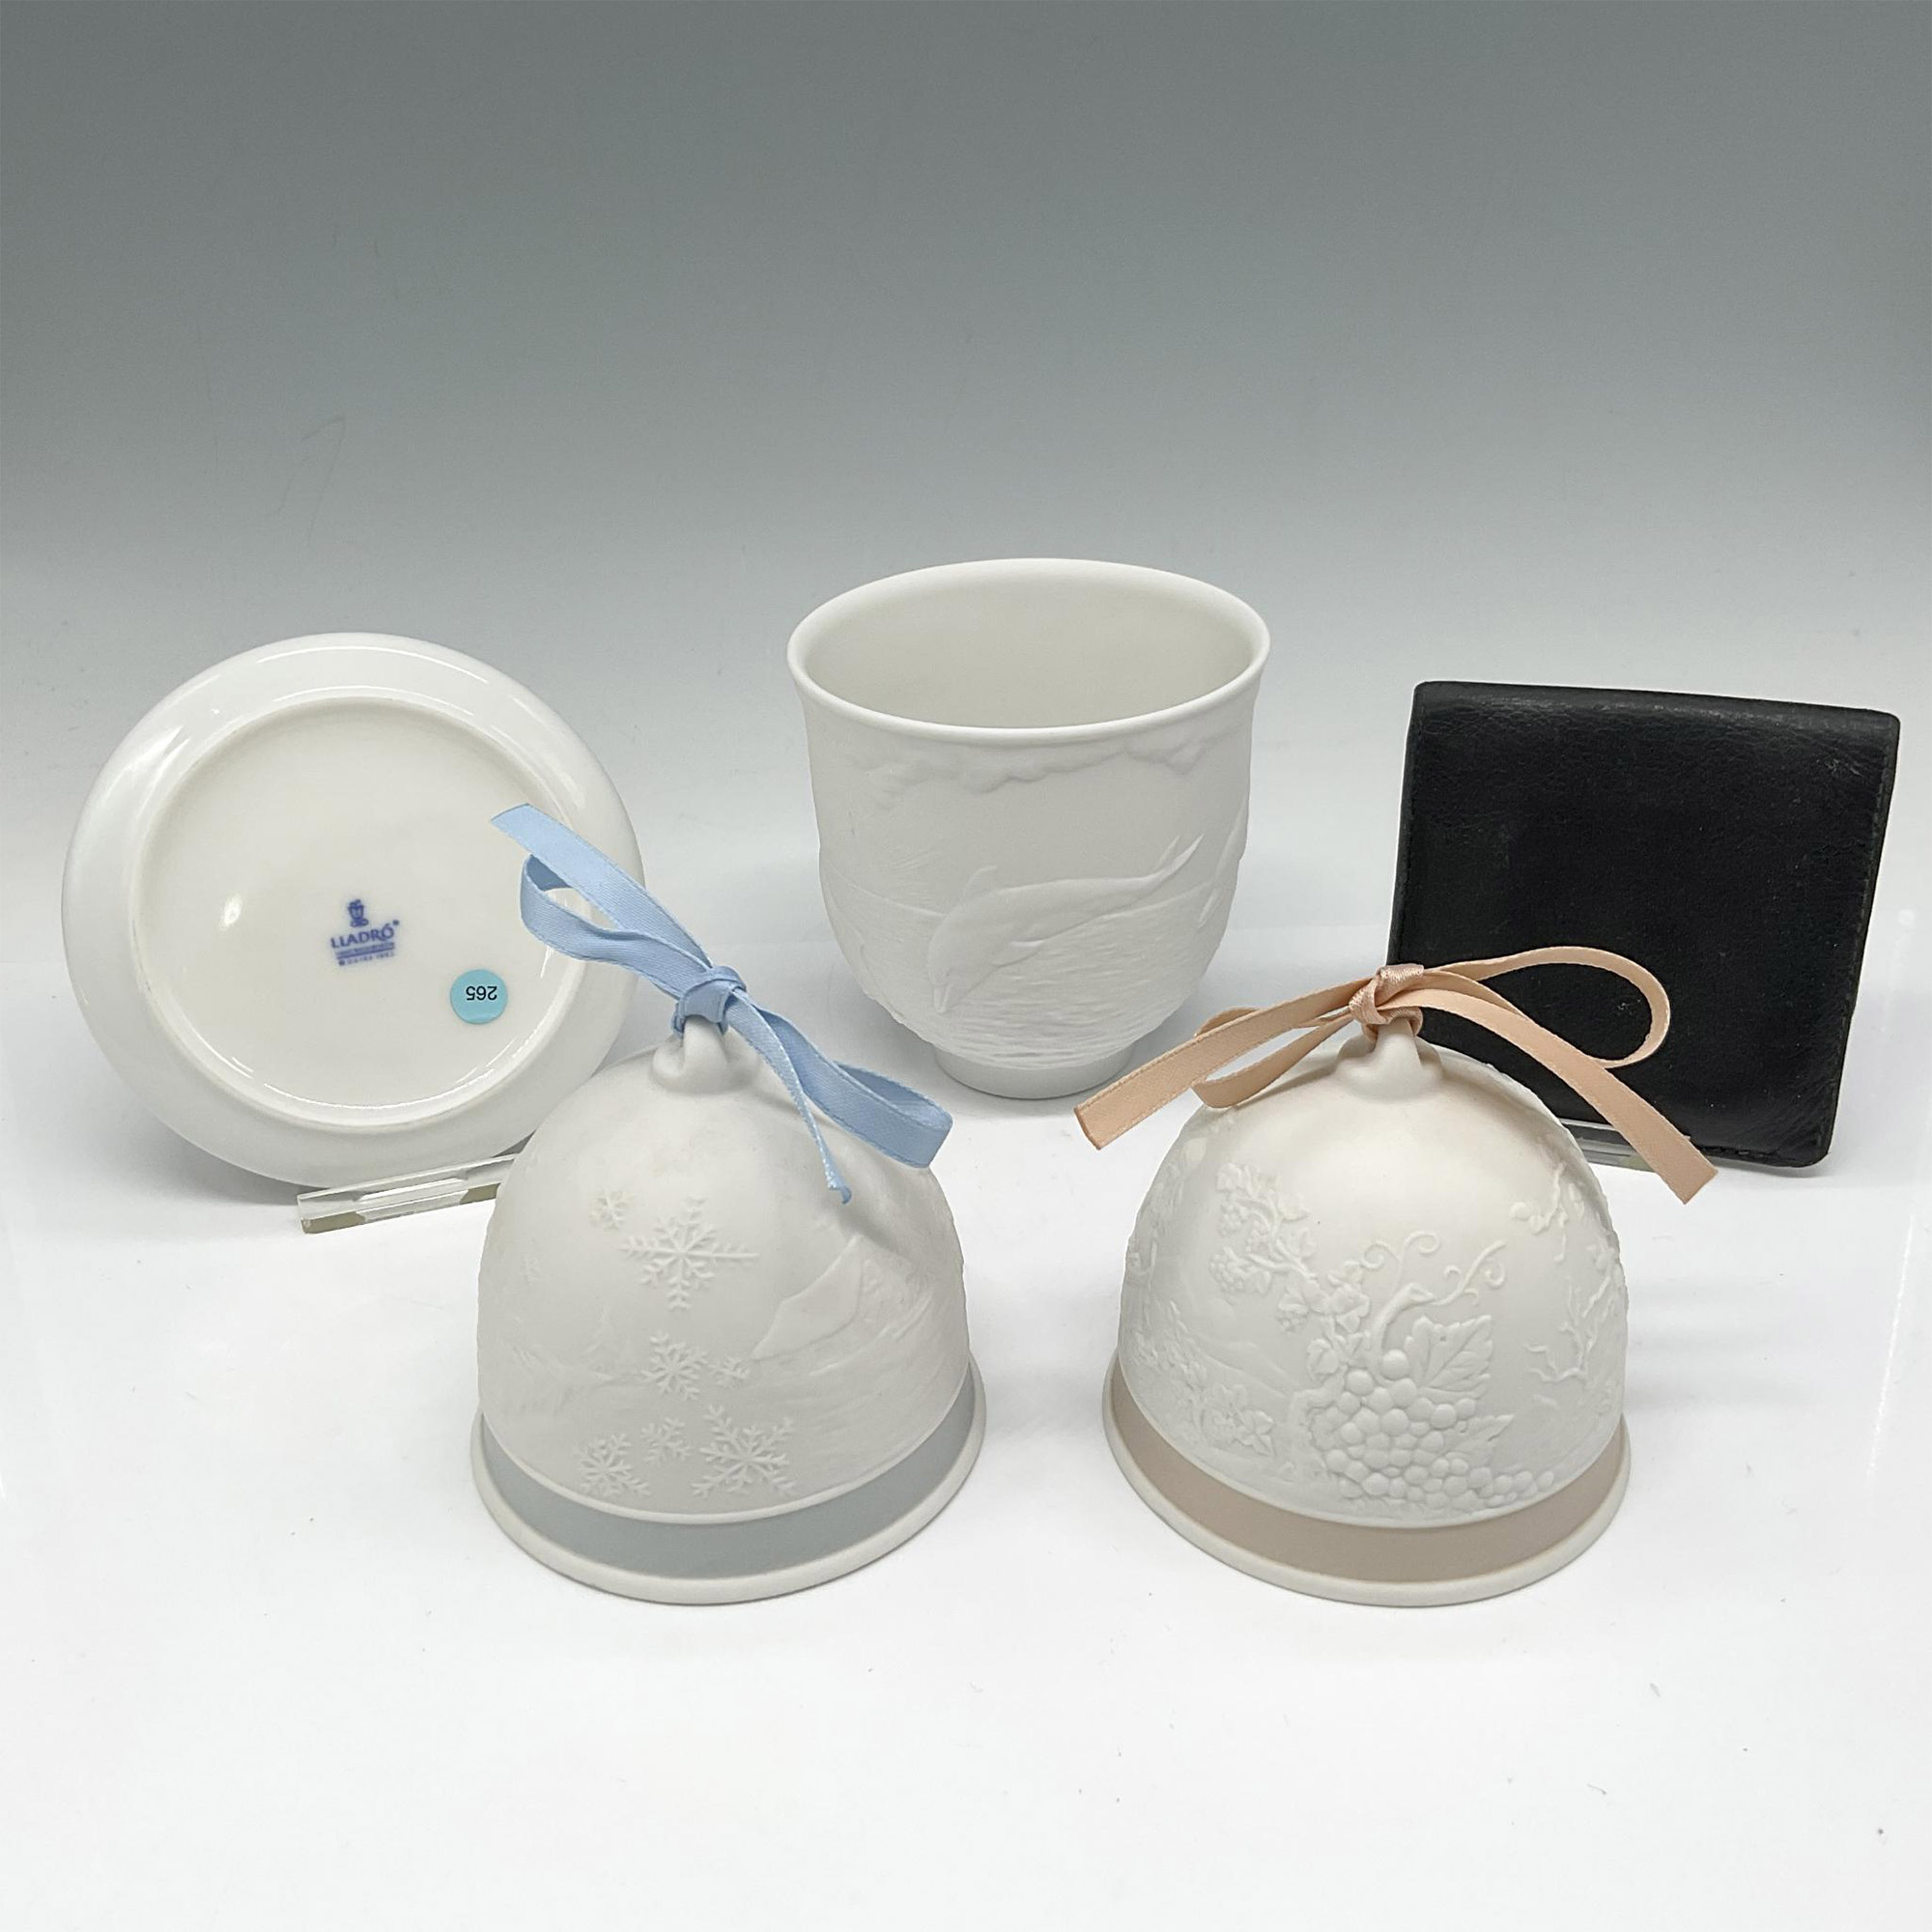 5pc Lladro CS Bells, Dolphins Cup, Duck Plate & Coin Purse - Image 2 of 4